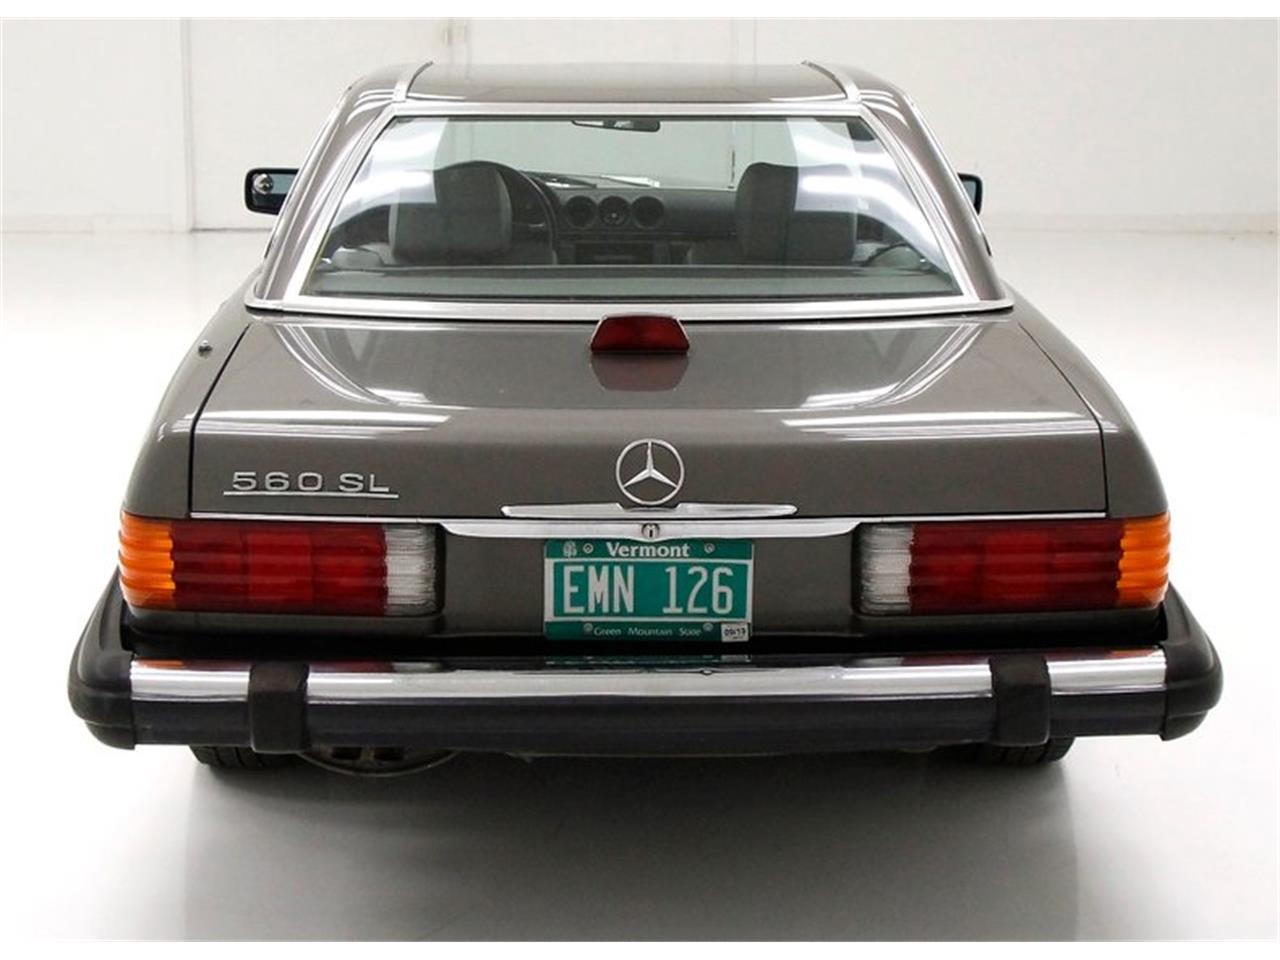 1986 Mercedes Benz 560sl For Sale In Morgantown Pa Classiccarsbay Com